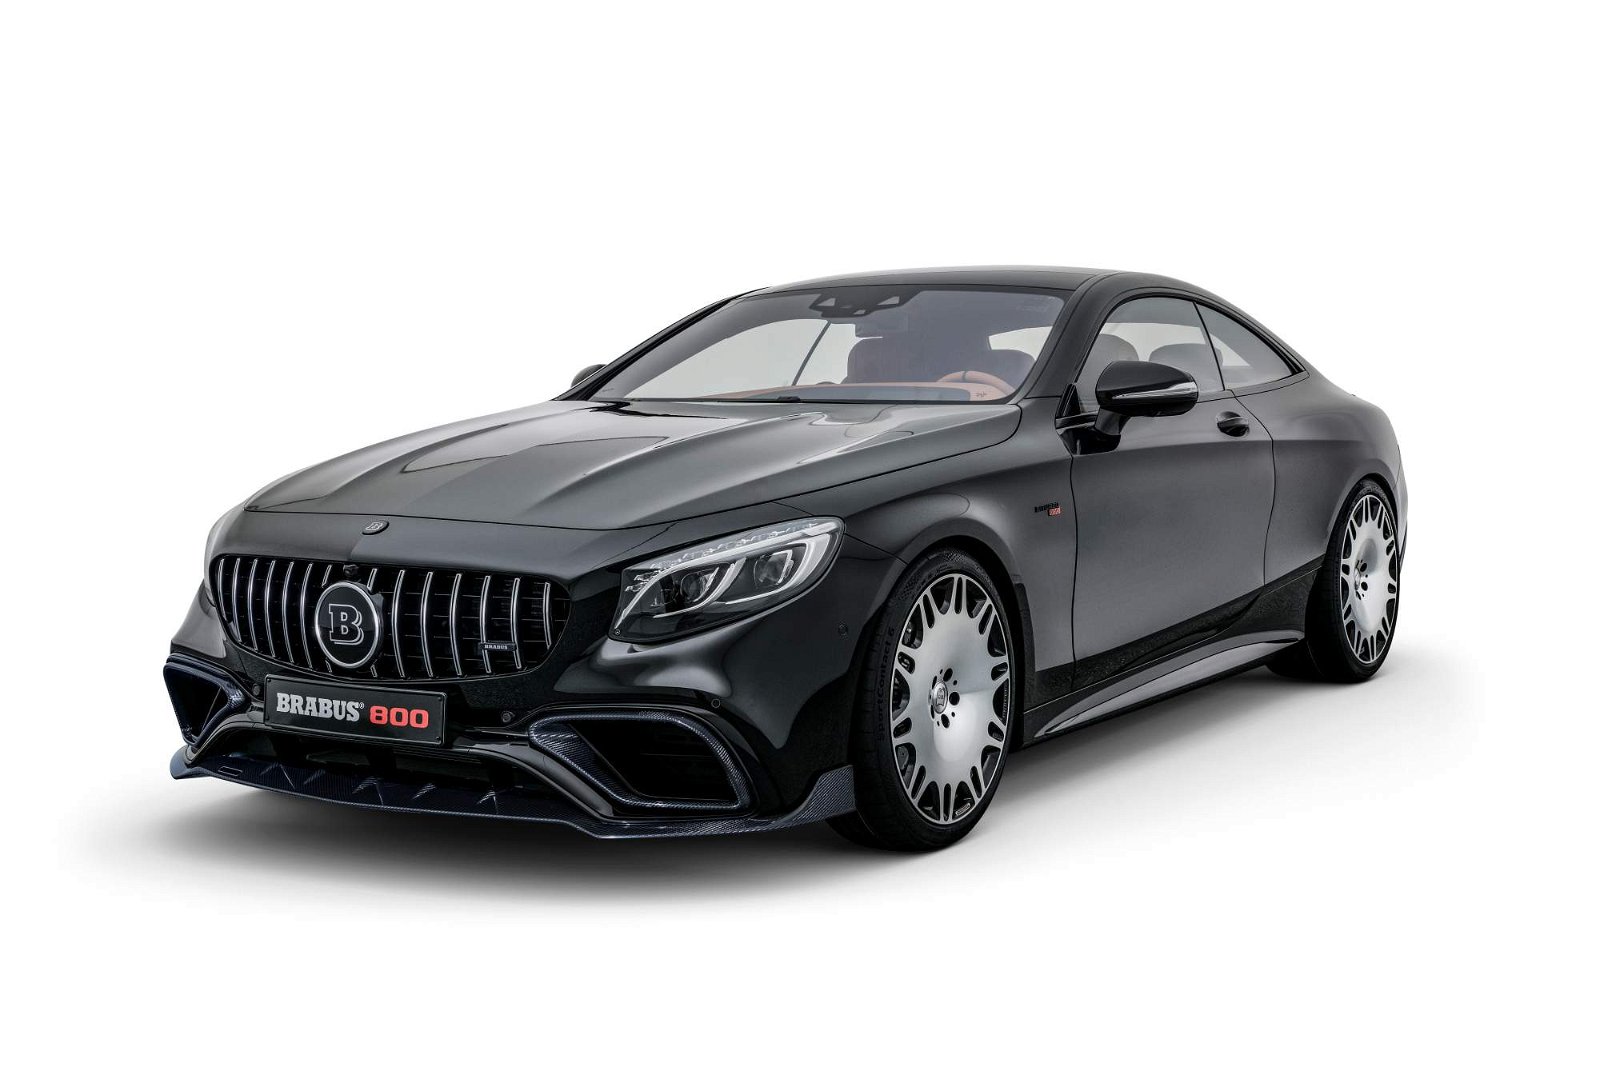 Brabus-800-based-on-Mercedes-AMG-S63-4MATIC+-Coupe-1